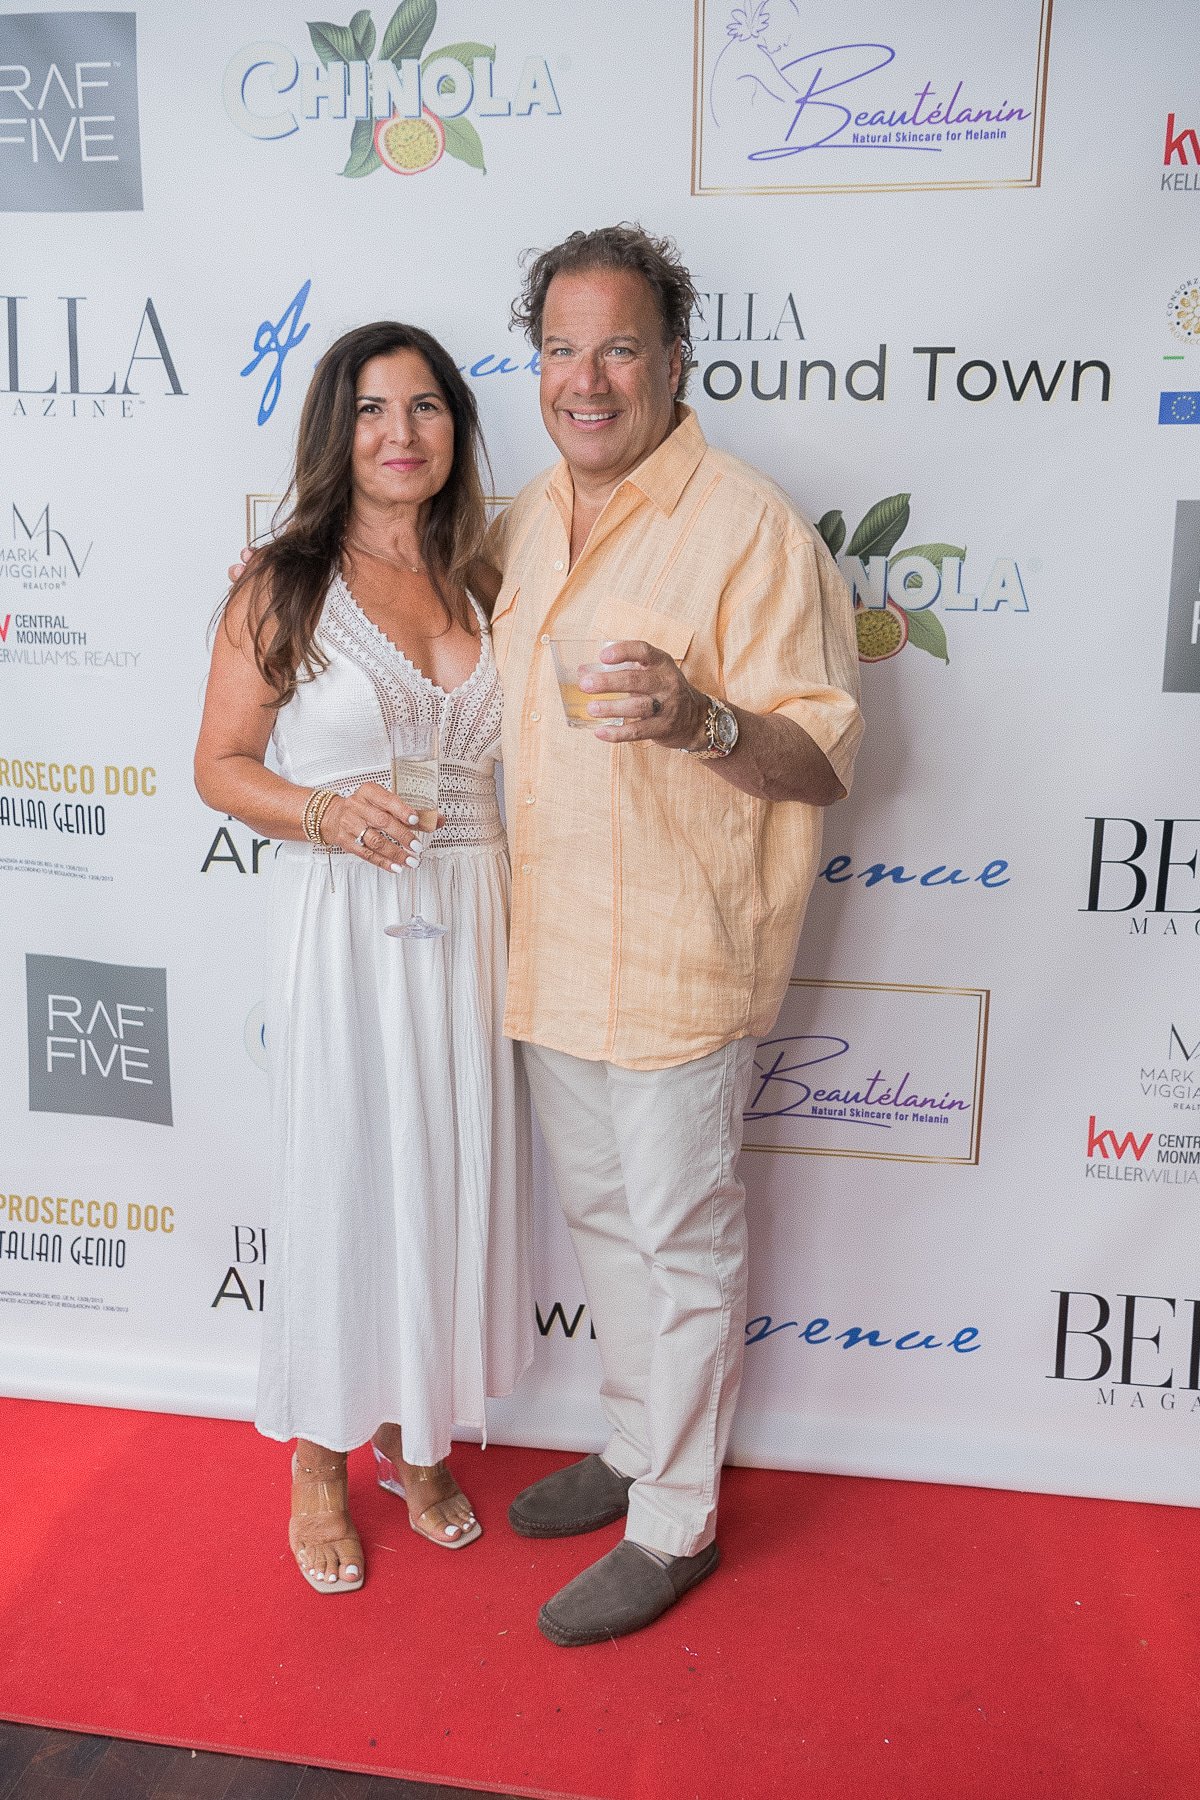 BELLA-MAGAZINE-Summer-Issue-Cover-Party-Avenue-Long-Branch-108.jpg